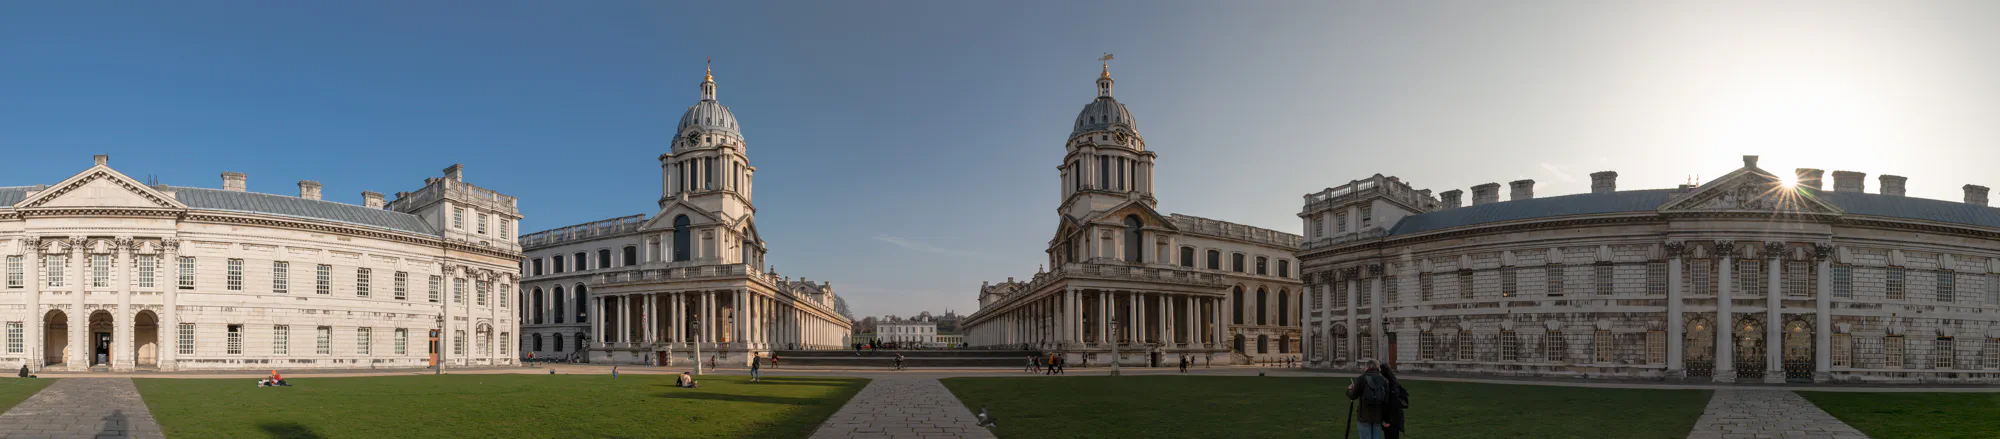 Old Naval College